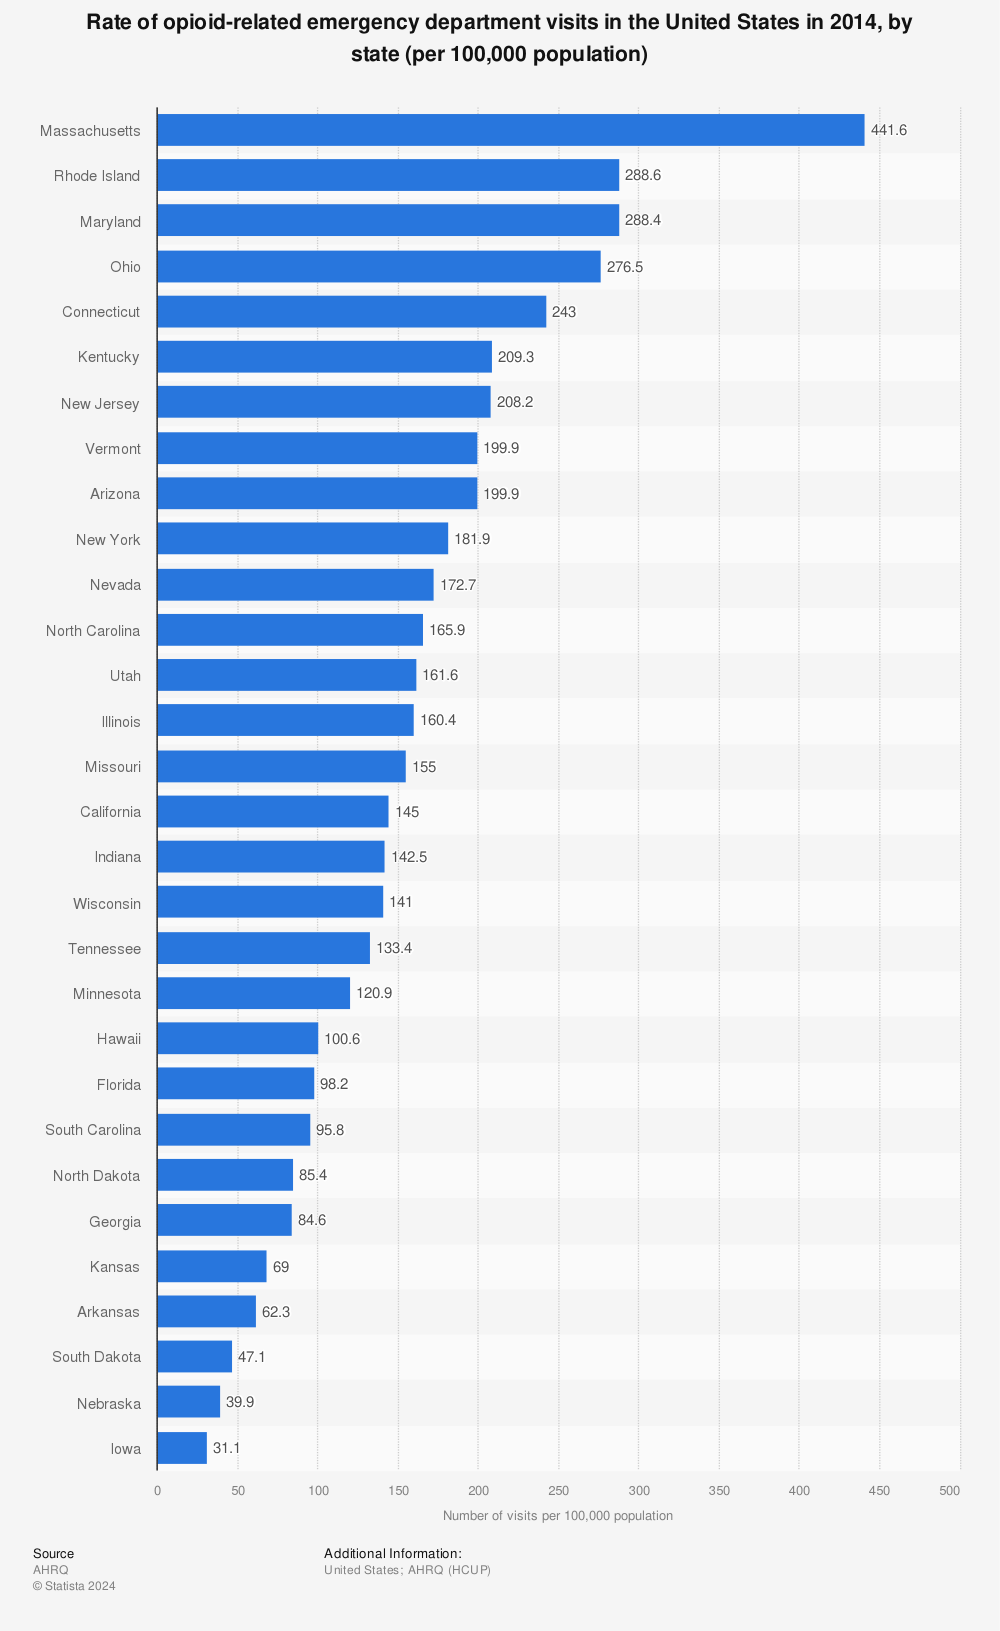 Statistic: Rate of opioid-related emergency department visits in the United States in 2014, by state (per 100,000 population) | Statista